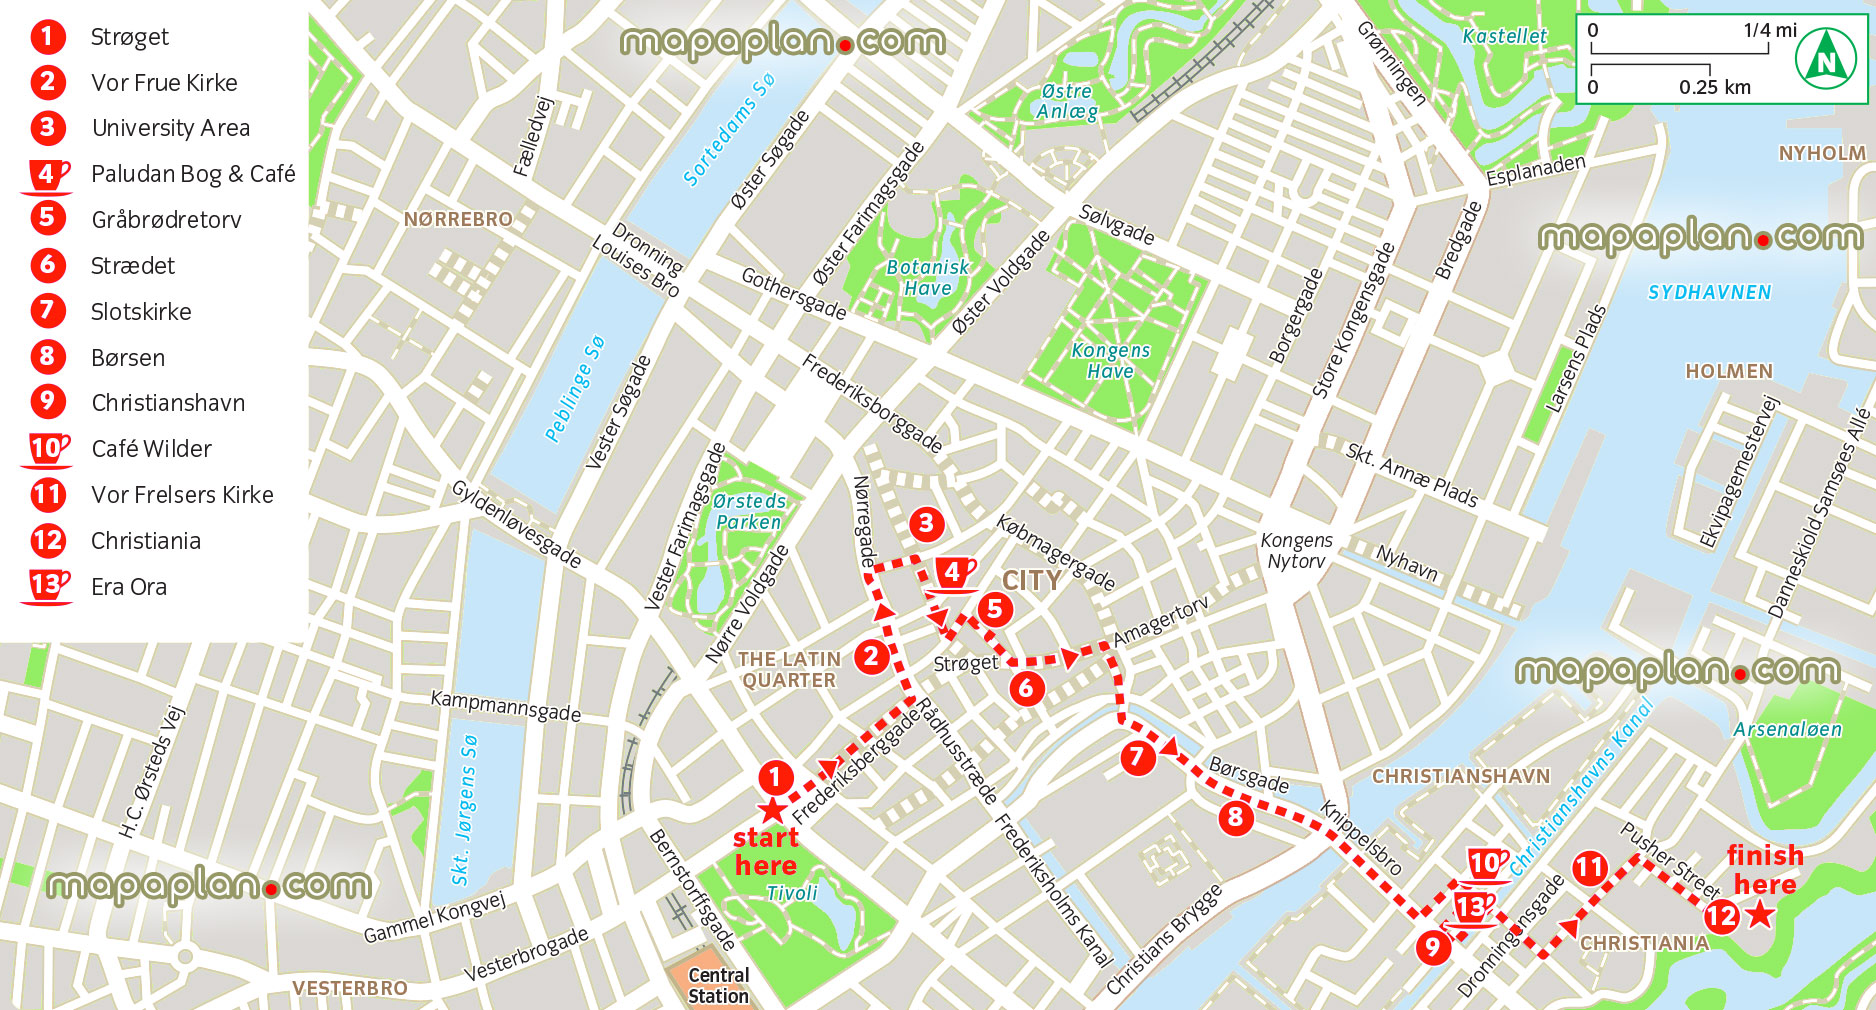 copenhagen latin quarter christiania walk free download city centre interactive visitors guide directions interesting sights around main railway station simple easy navigate diagram holiday top points interest central district neighourhood orientations Copenhagen Top tourist attractions map